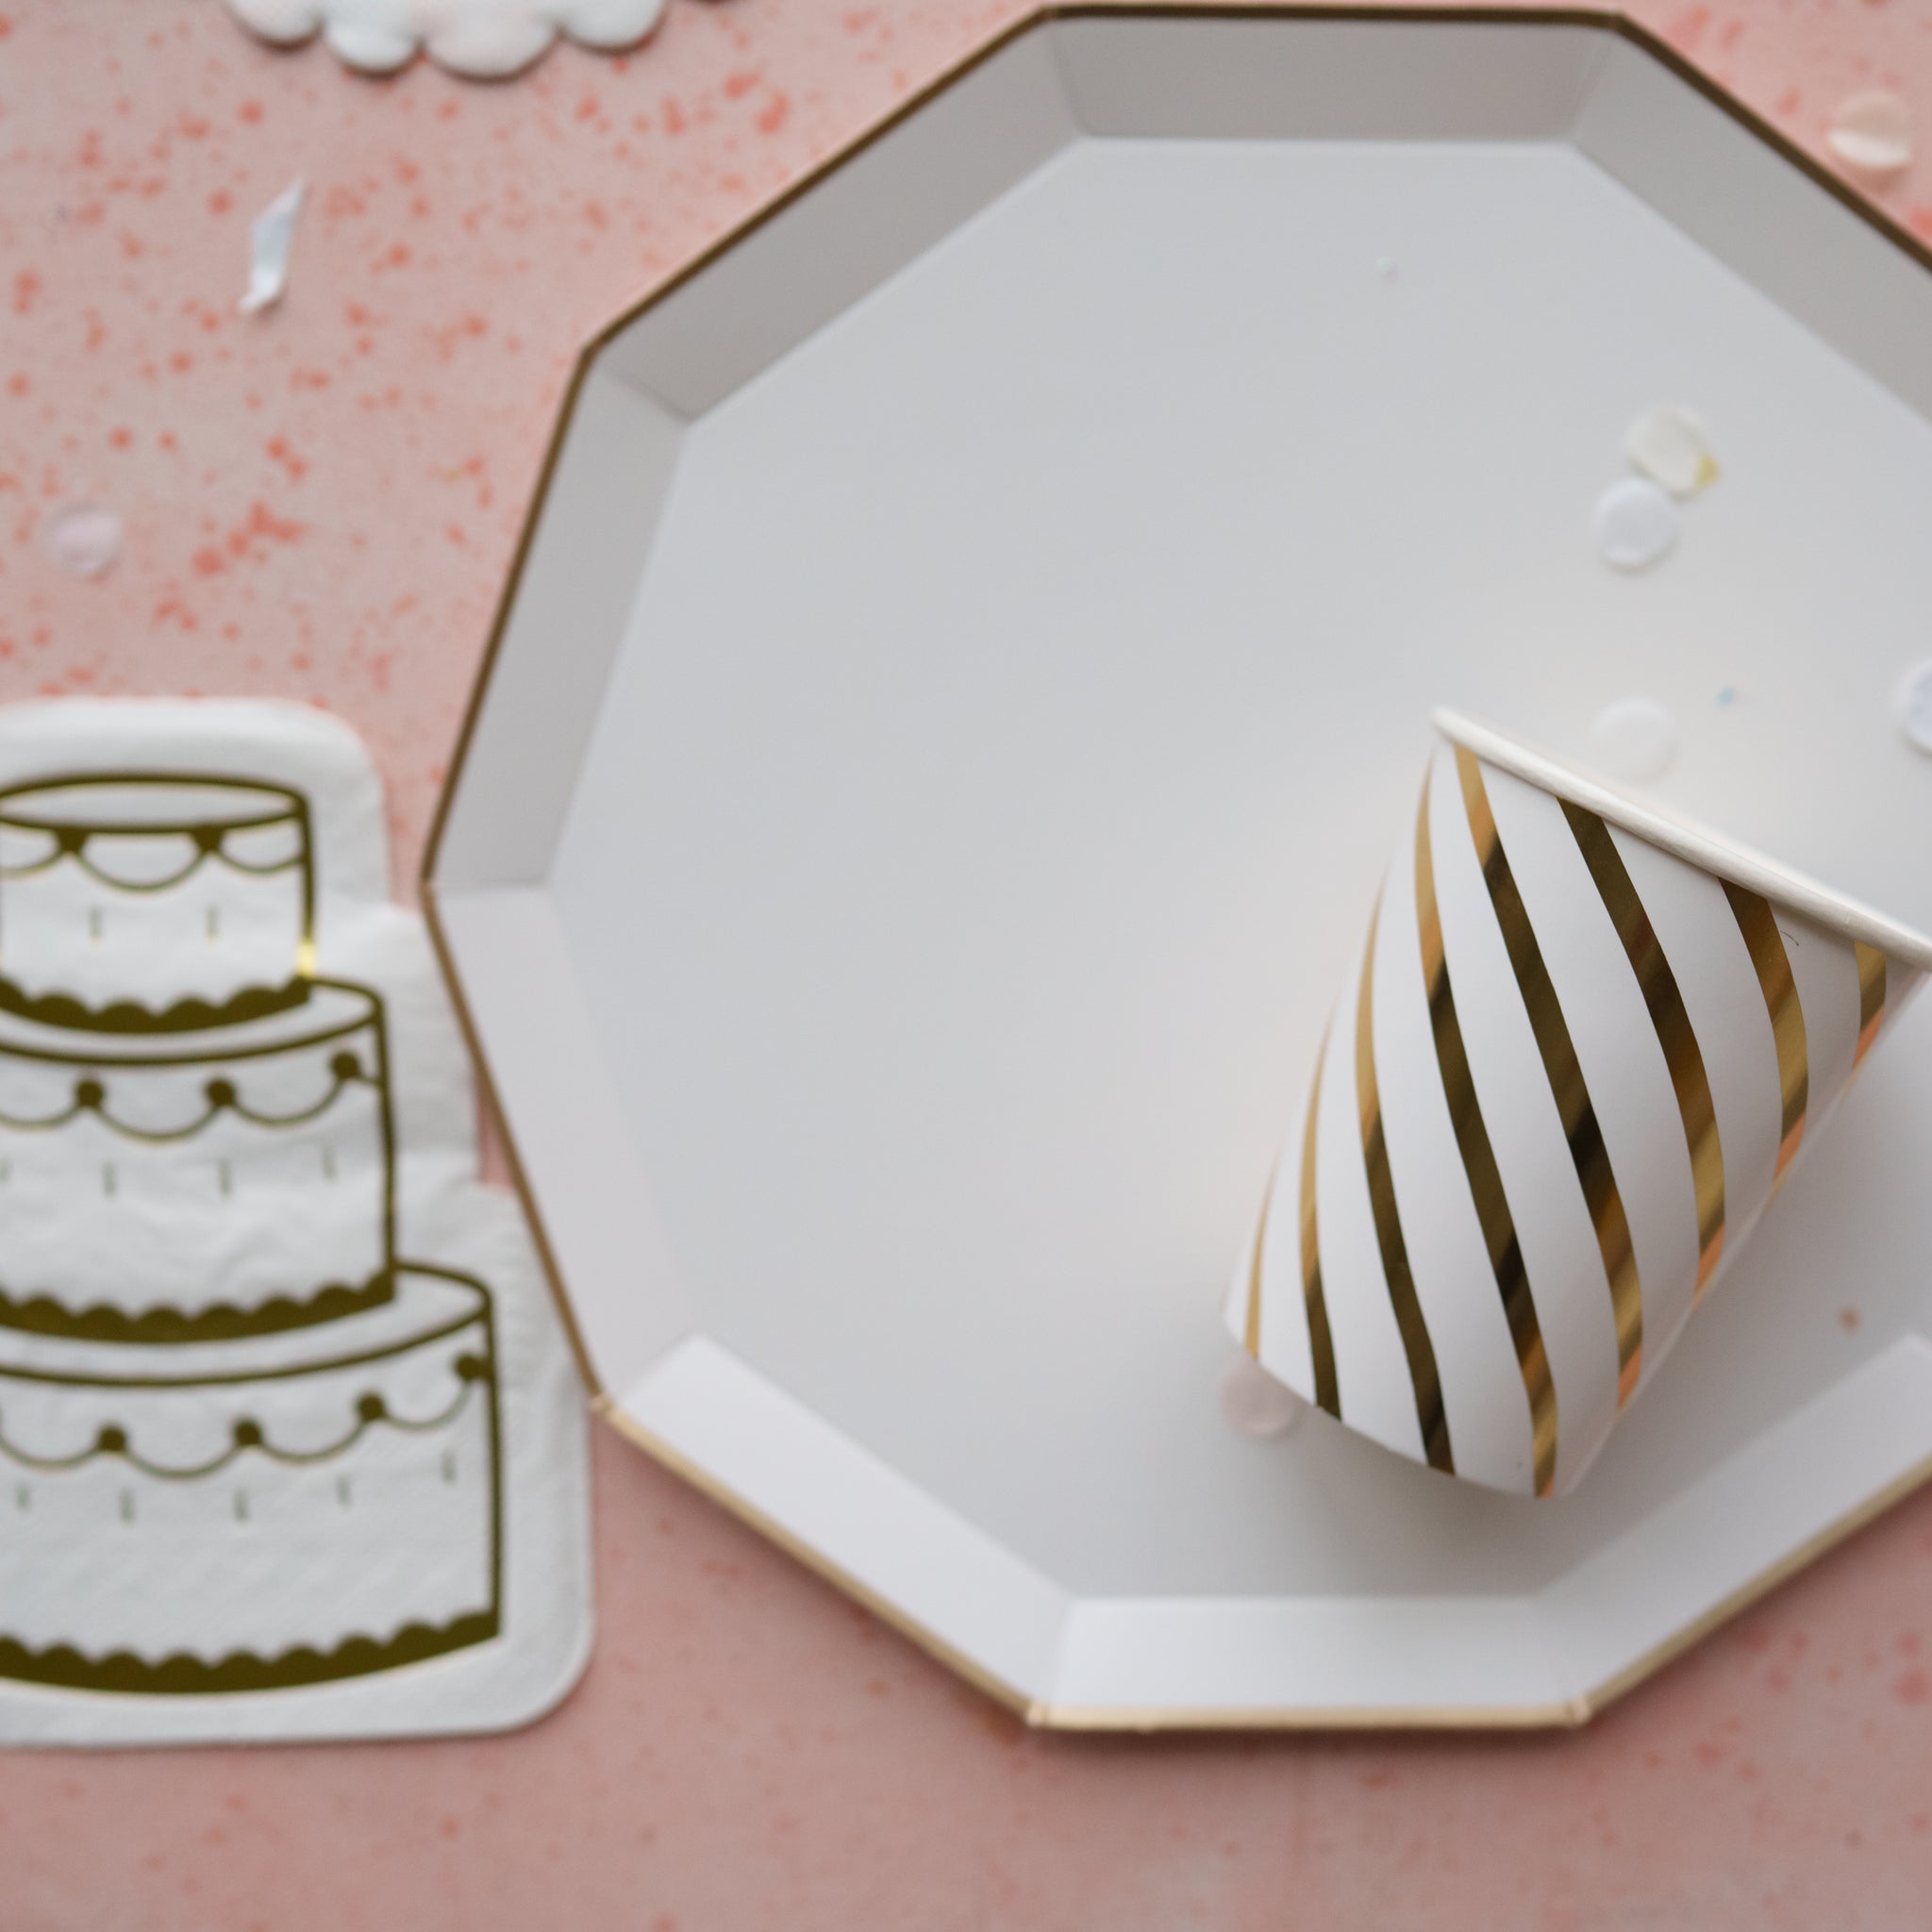 White premium party plates to use for a wedding shower, anniversary party, or any party theme!